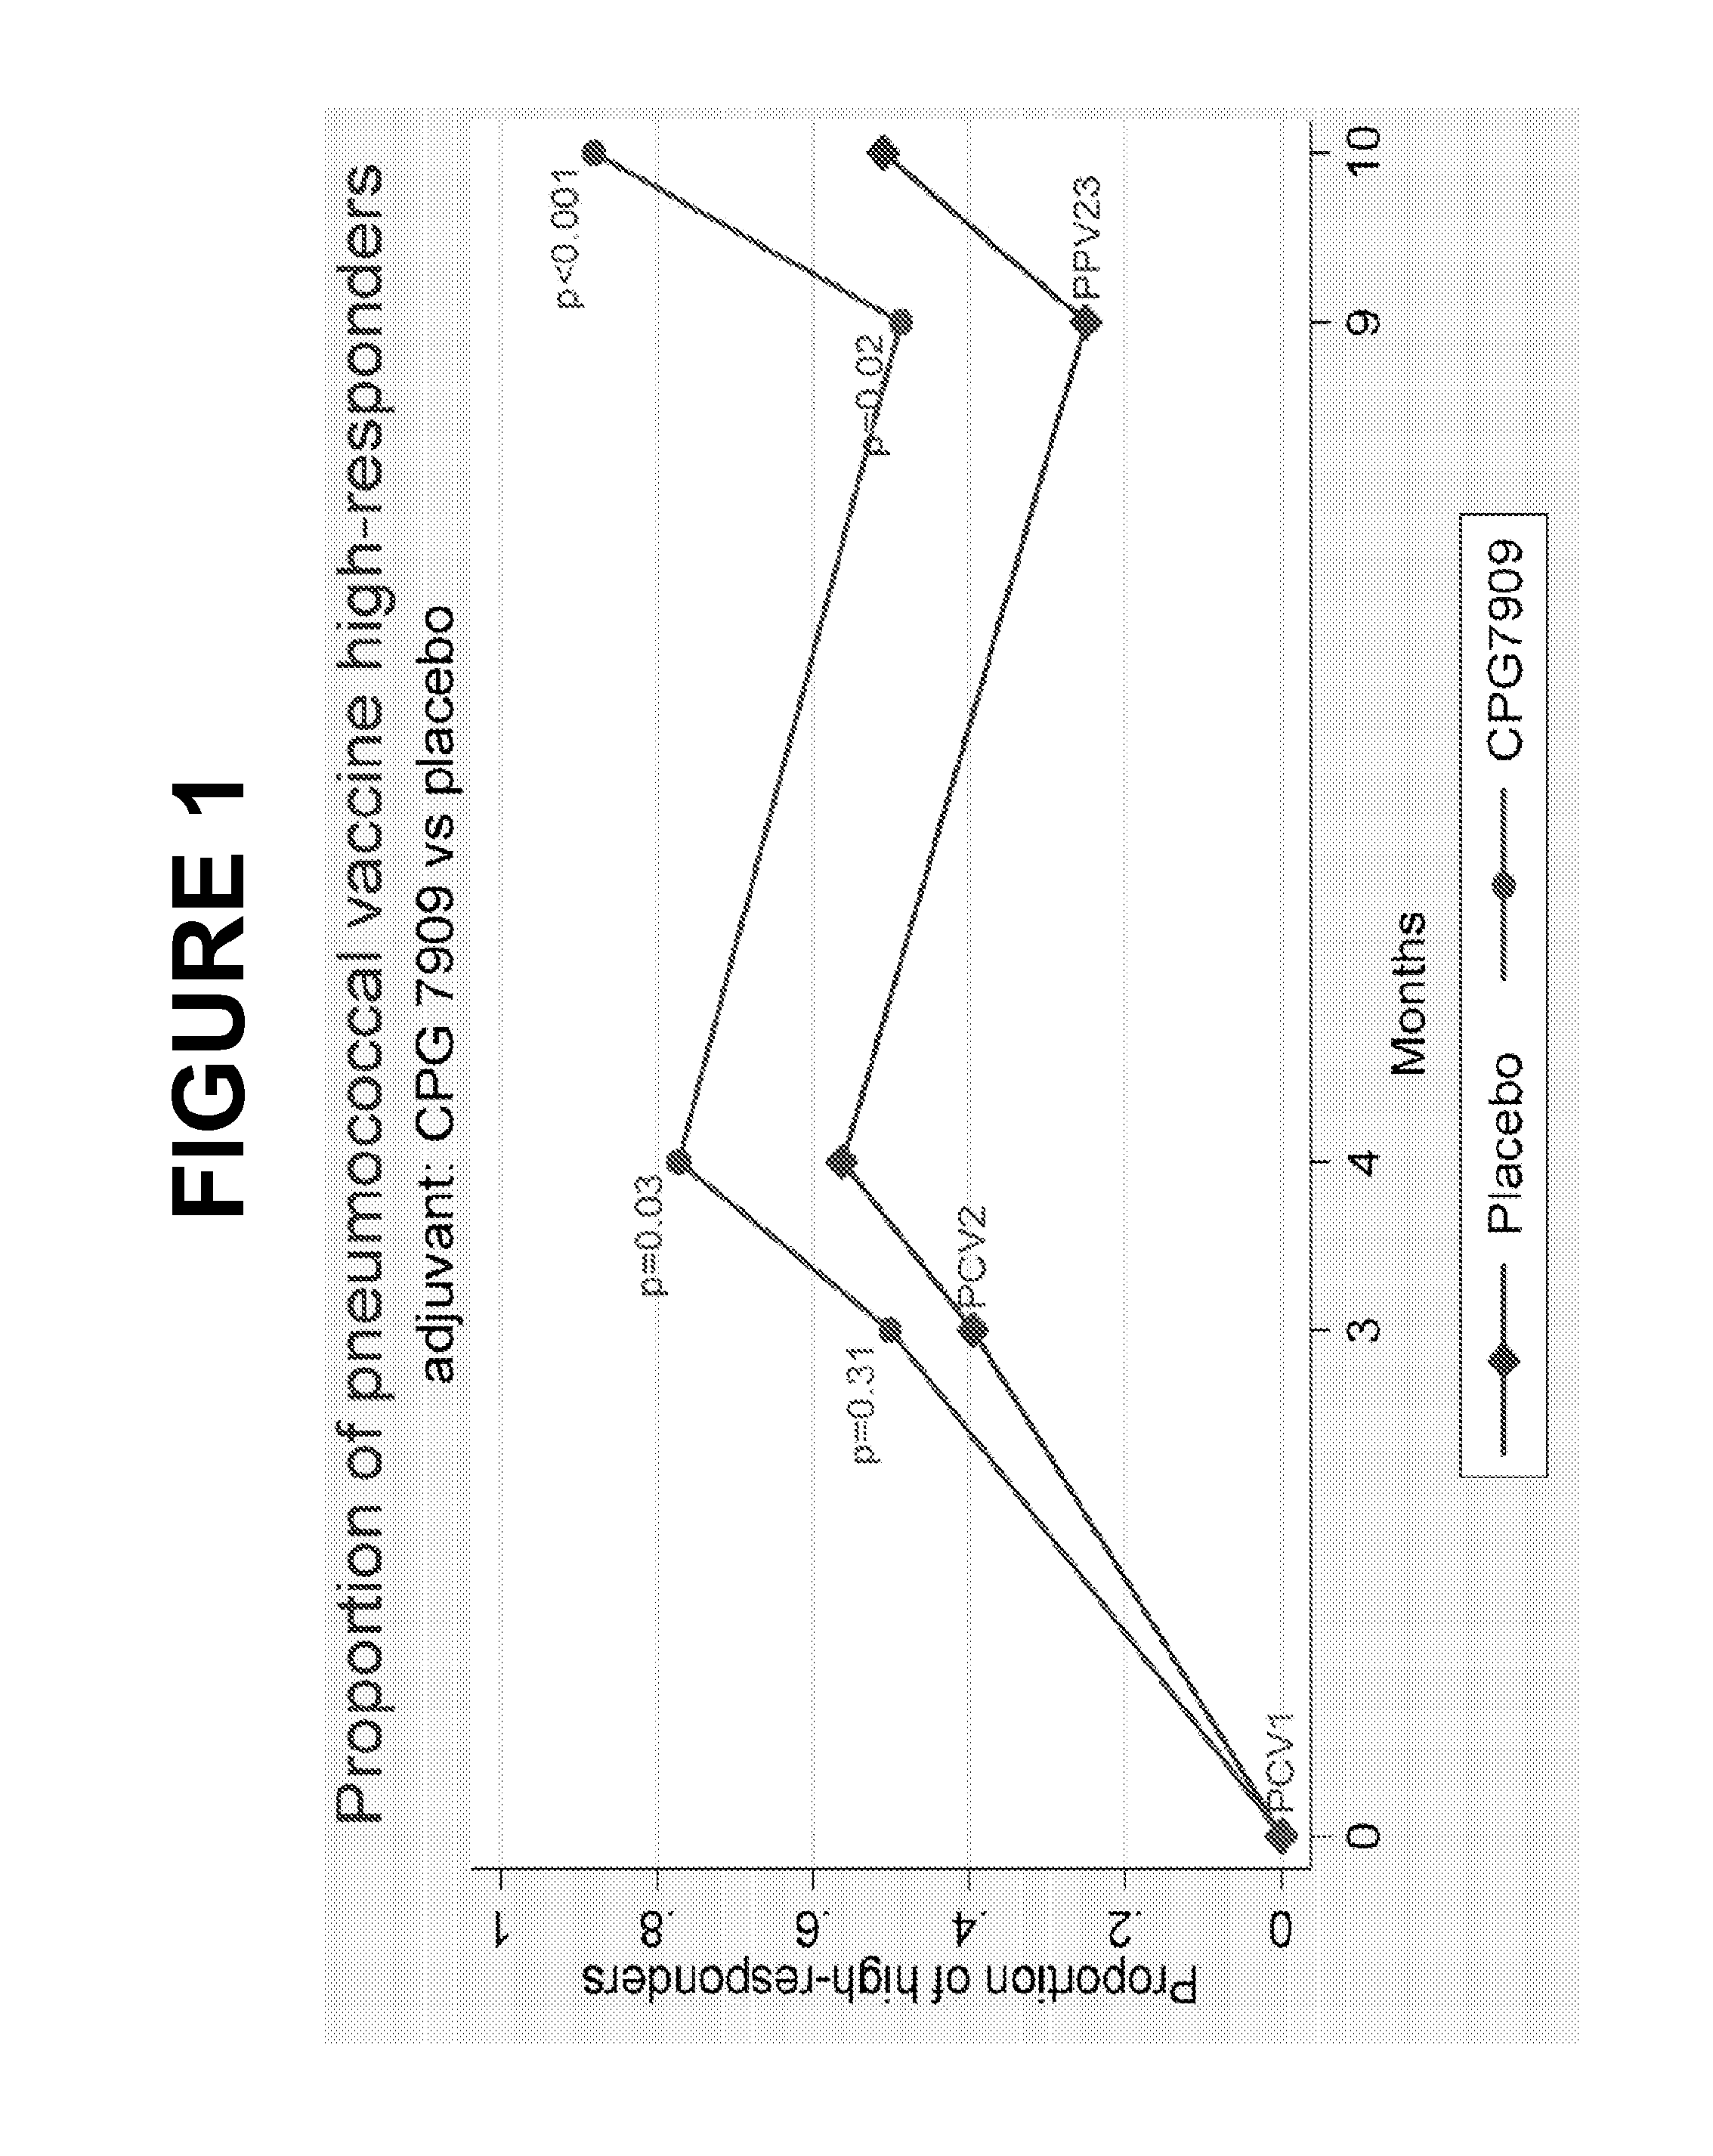 Pneumococcal Vaccine and Uses Thereof